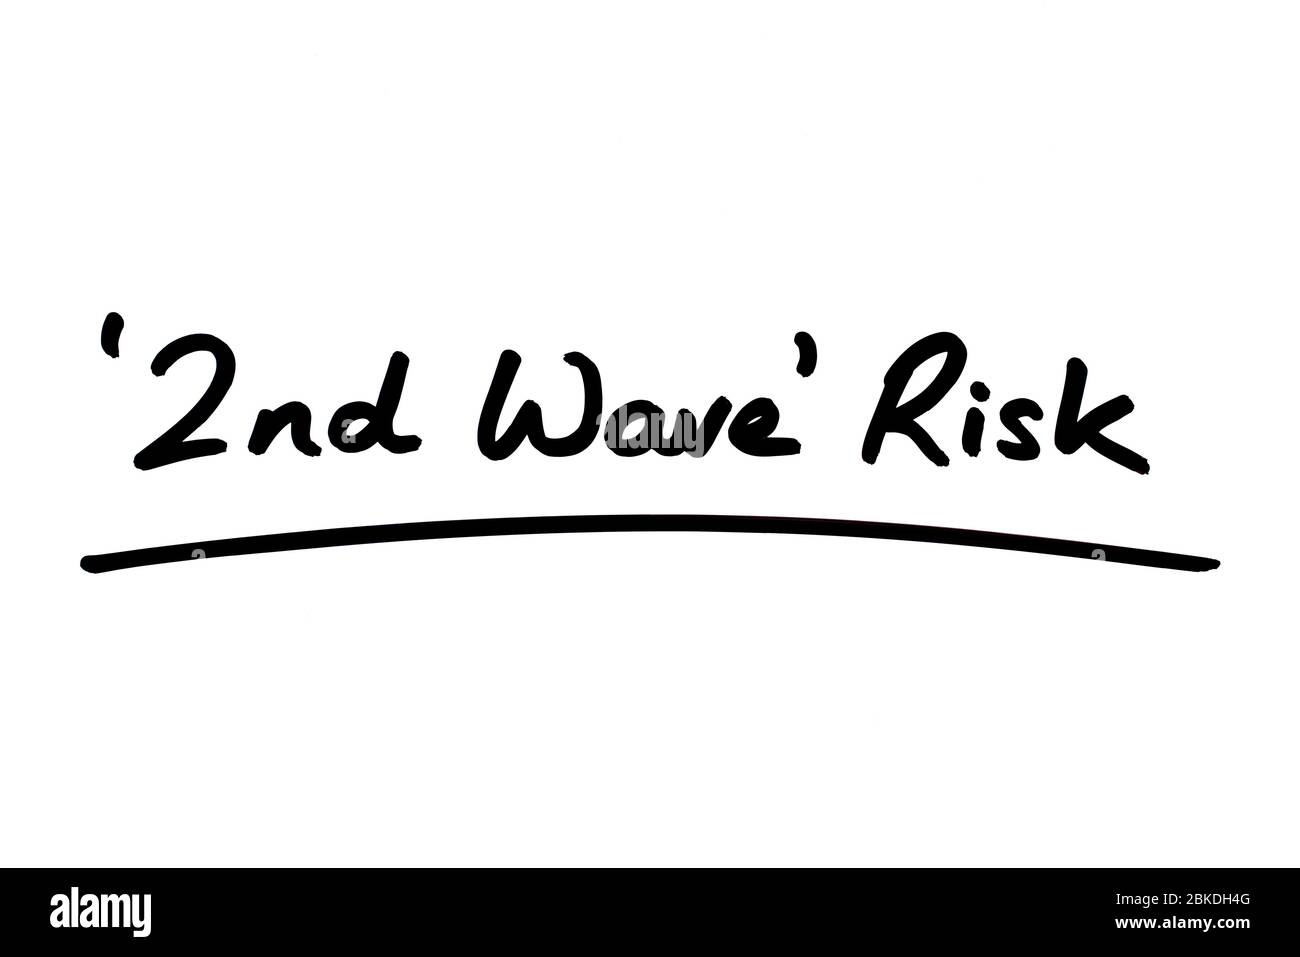 2nd Wave Risk handwritten on a white background. Stock Photo